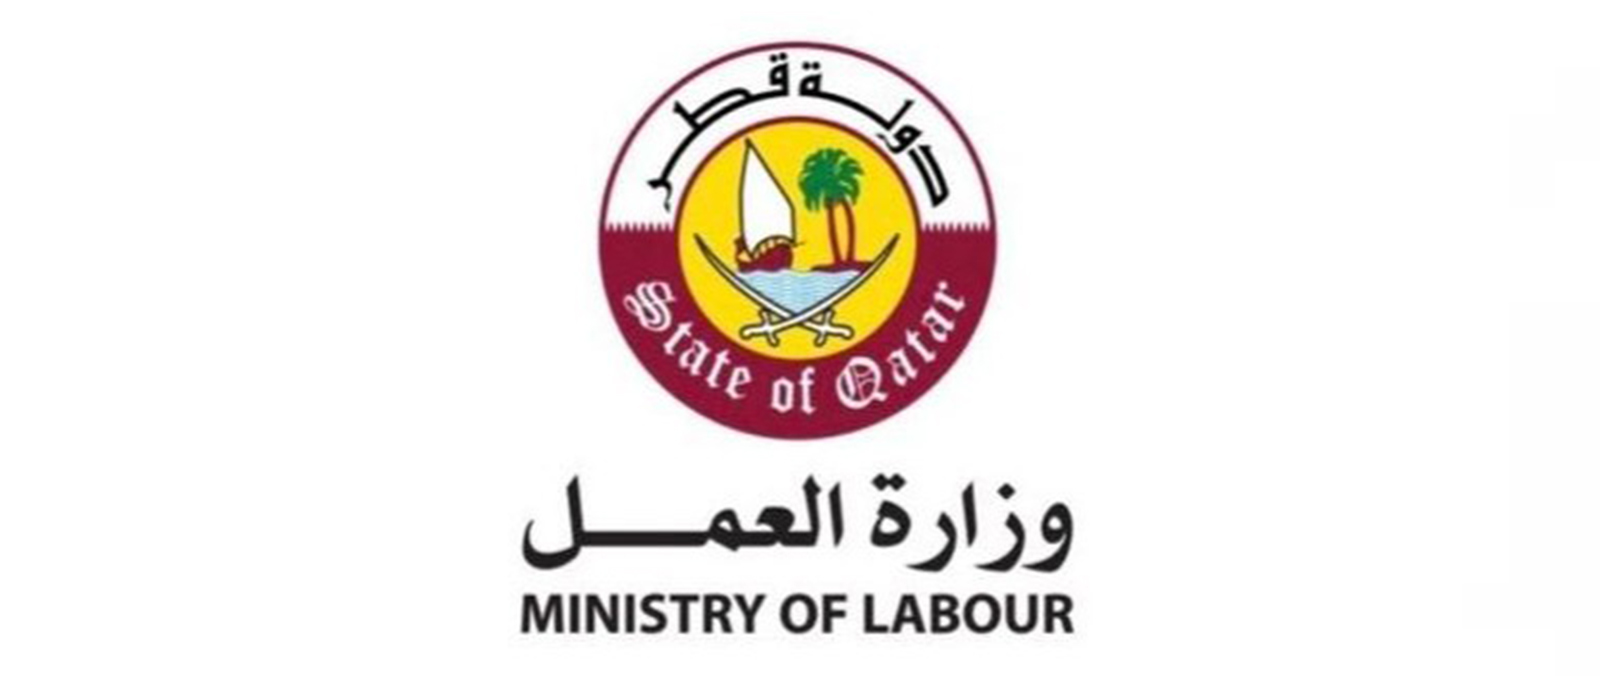 The Ministry of Labour